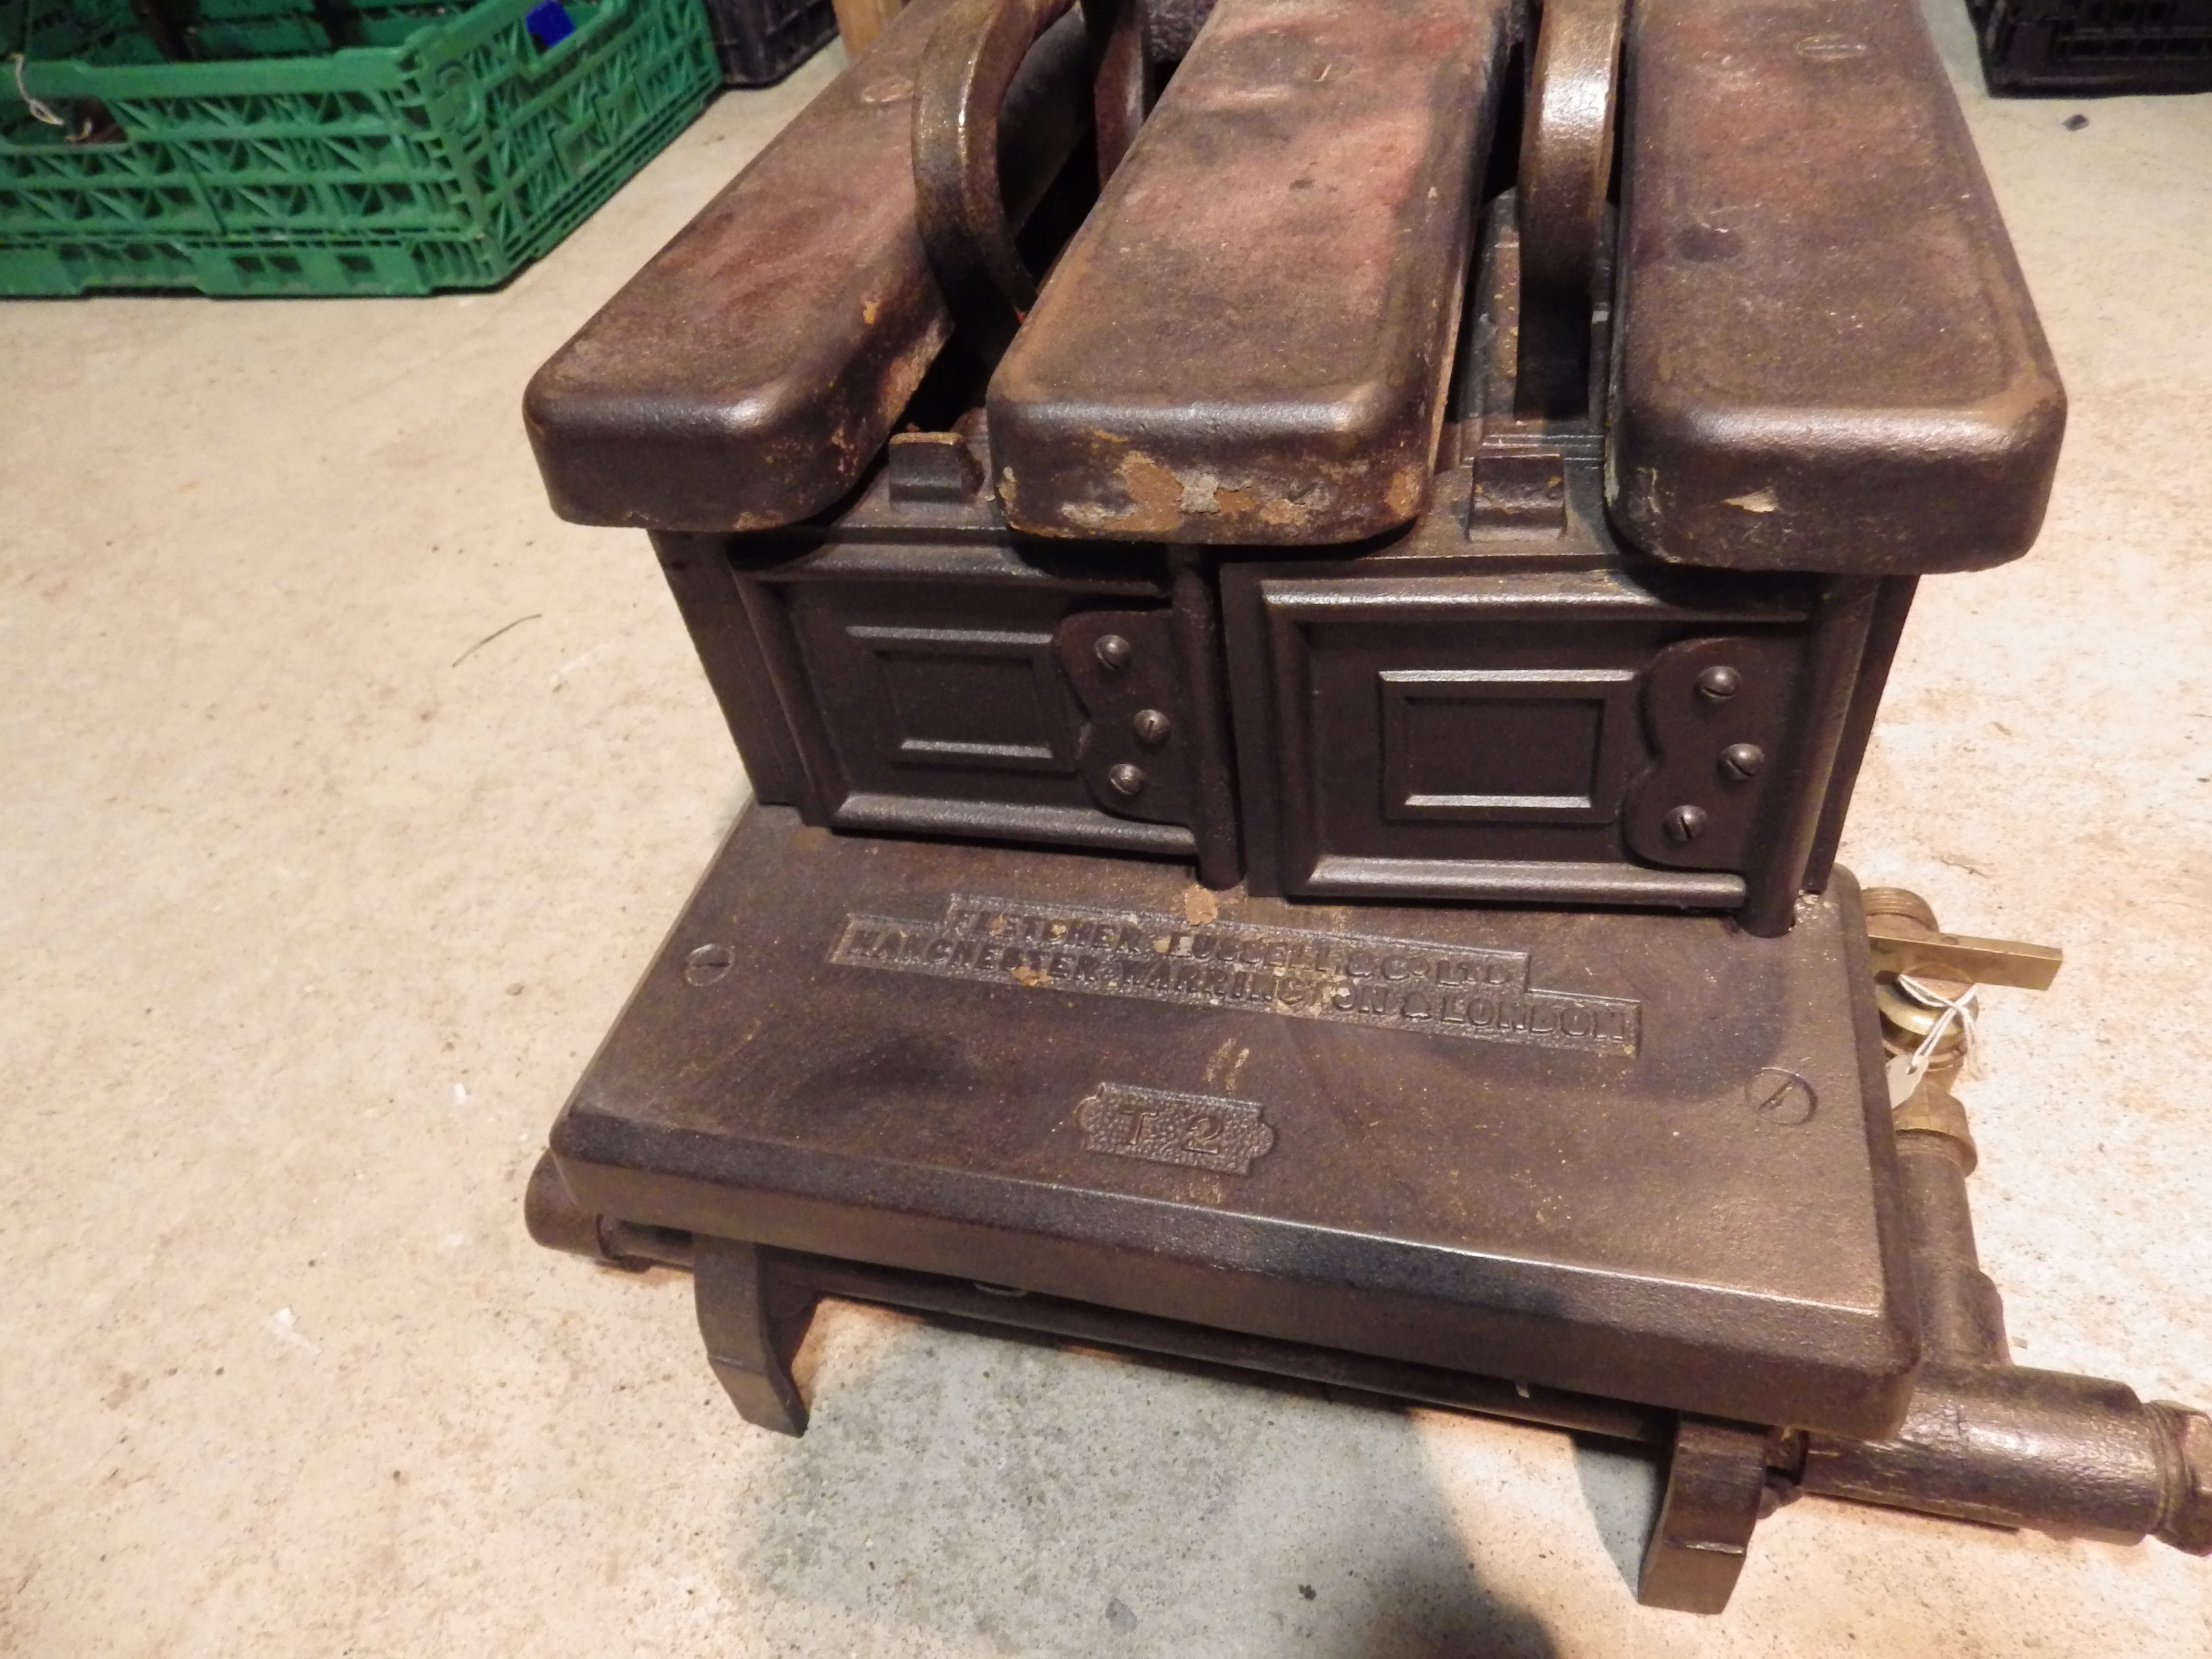 Fletcher Russell & Co Ltd Manchester, Warrington & London cast iron gas stove T2 with 2 tailor goose - Image 2 of 5